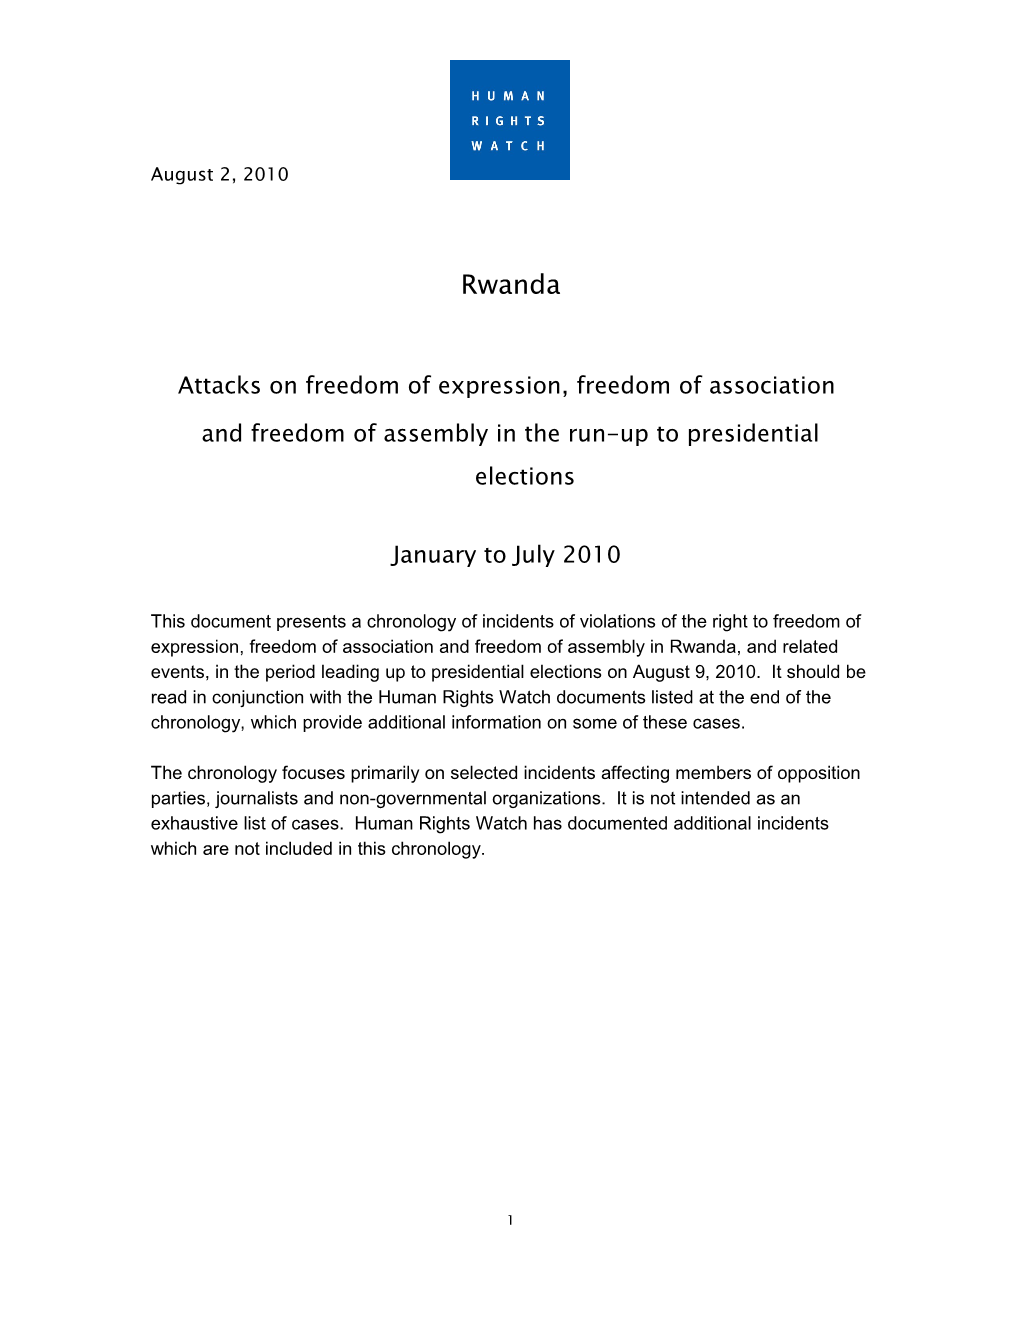 Attacks on Freedom of Expression, Freedom of Association